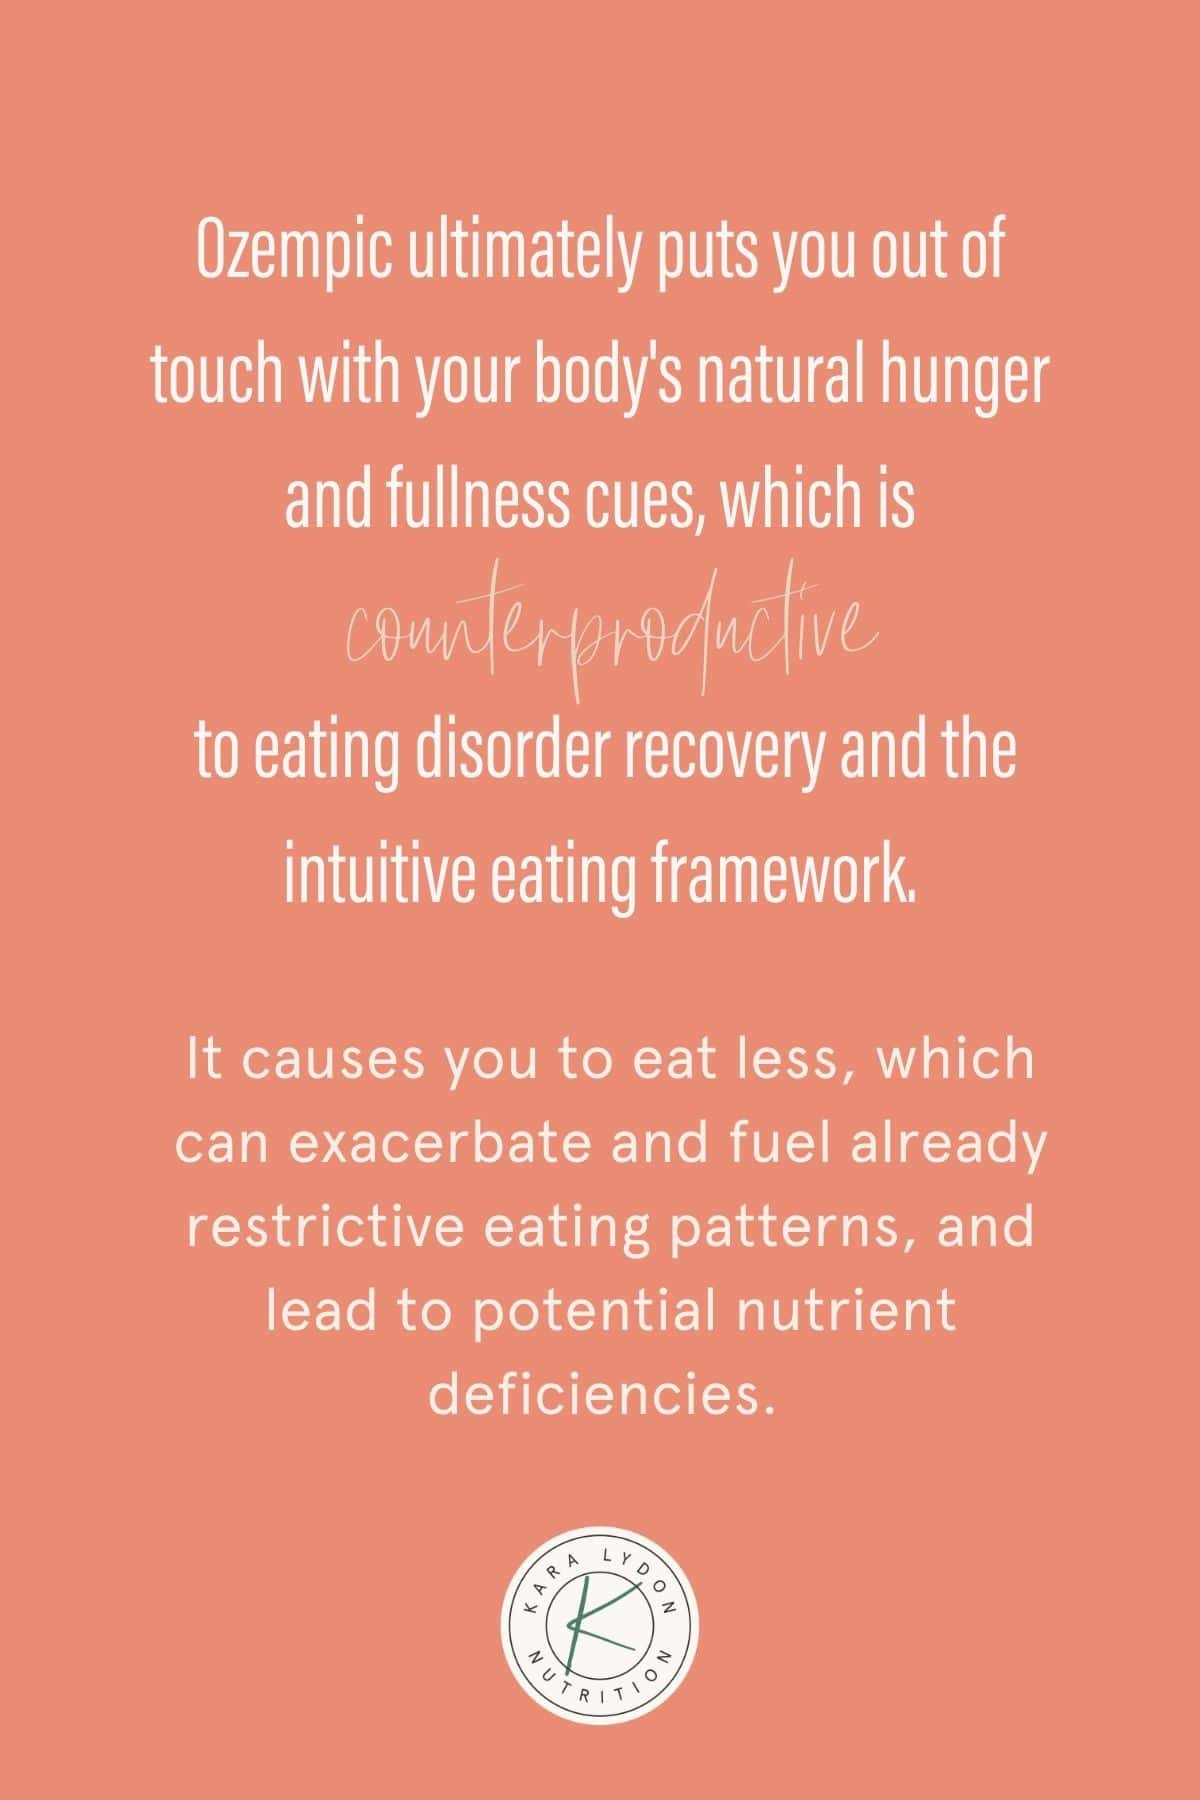 Graphic with quote: "Ozempic ultimately puts you out of touch with your body's natural hunger and fullness cues, which is counterproductive to eating disorder recovery and the intuitive eating framework. It causes you to eat less, which can exacerbate and fuel already restrictive eating patterns, and lead to potential nutrient deficiencies."